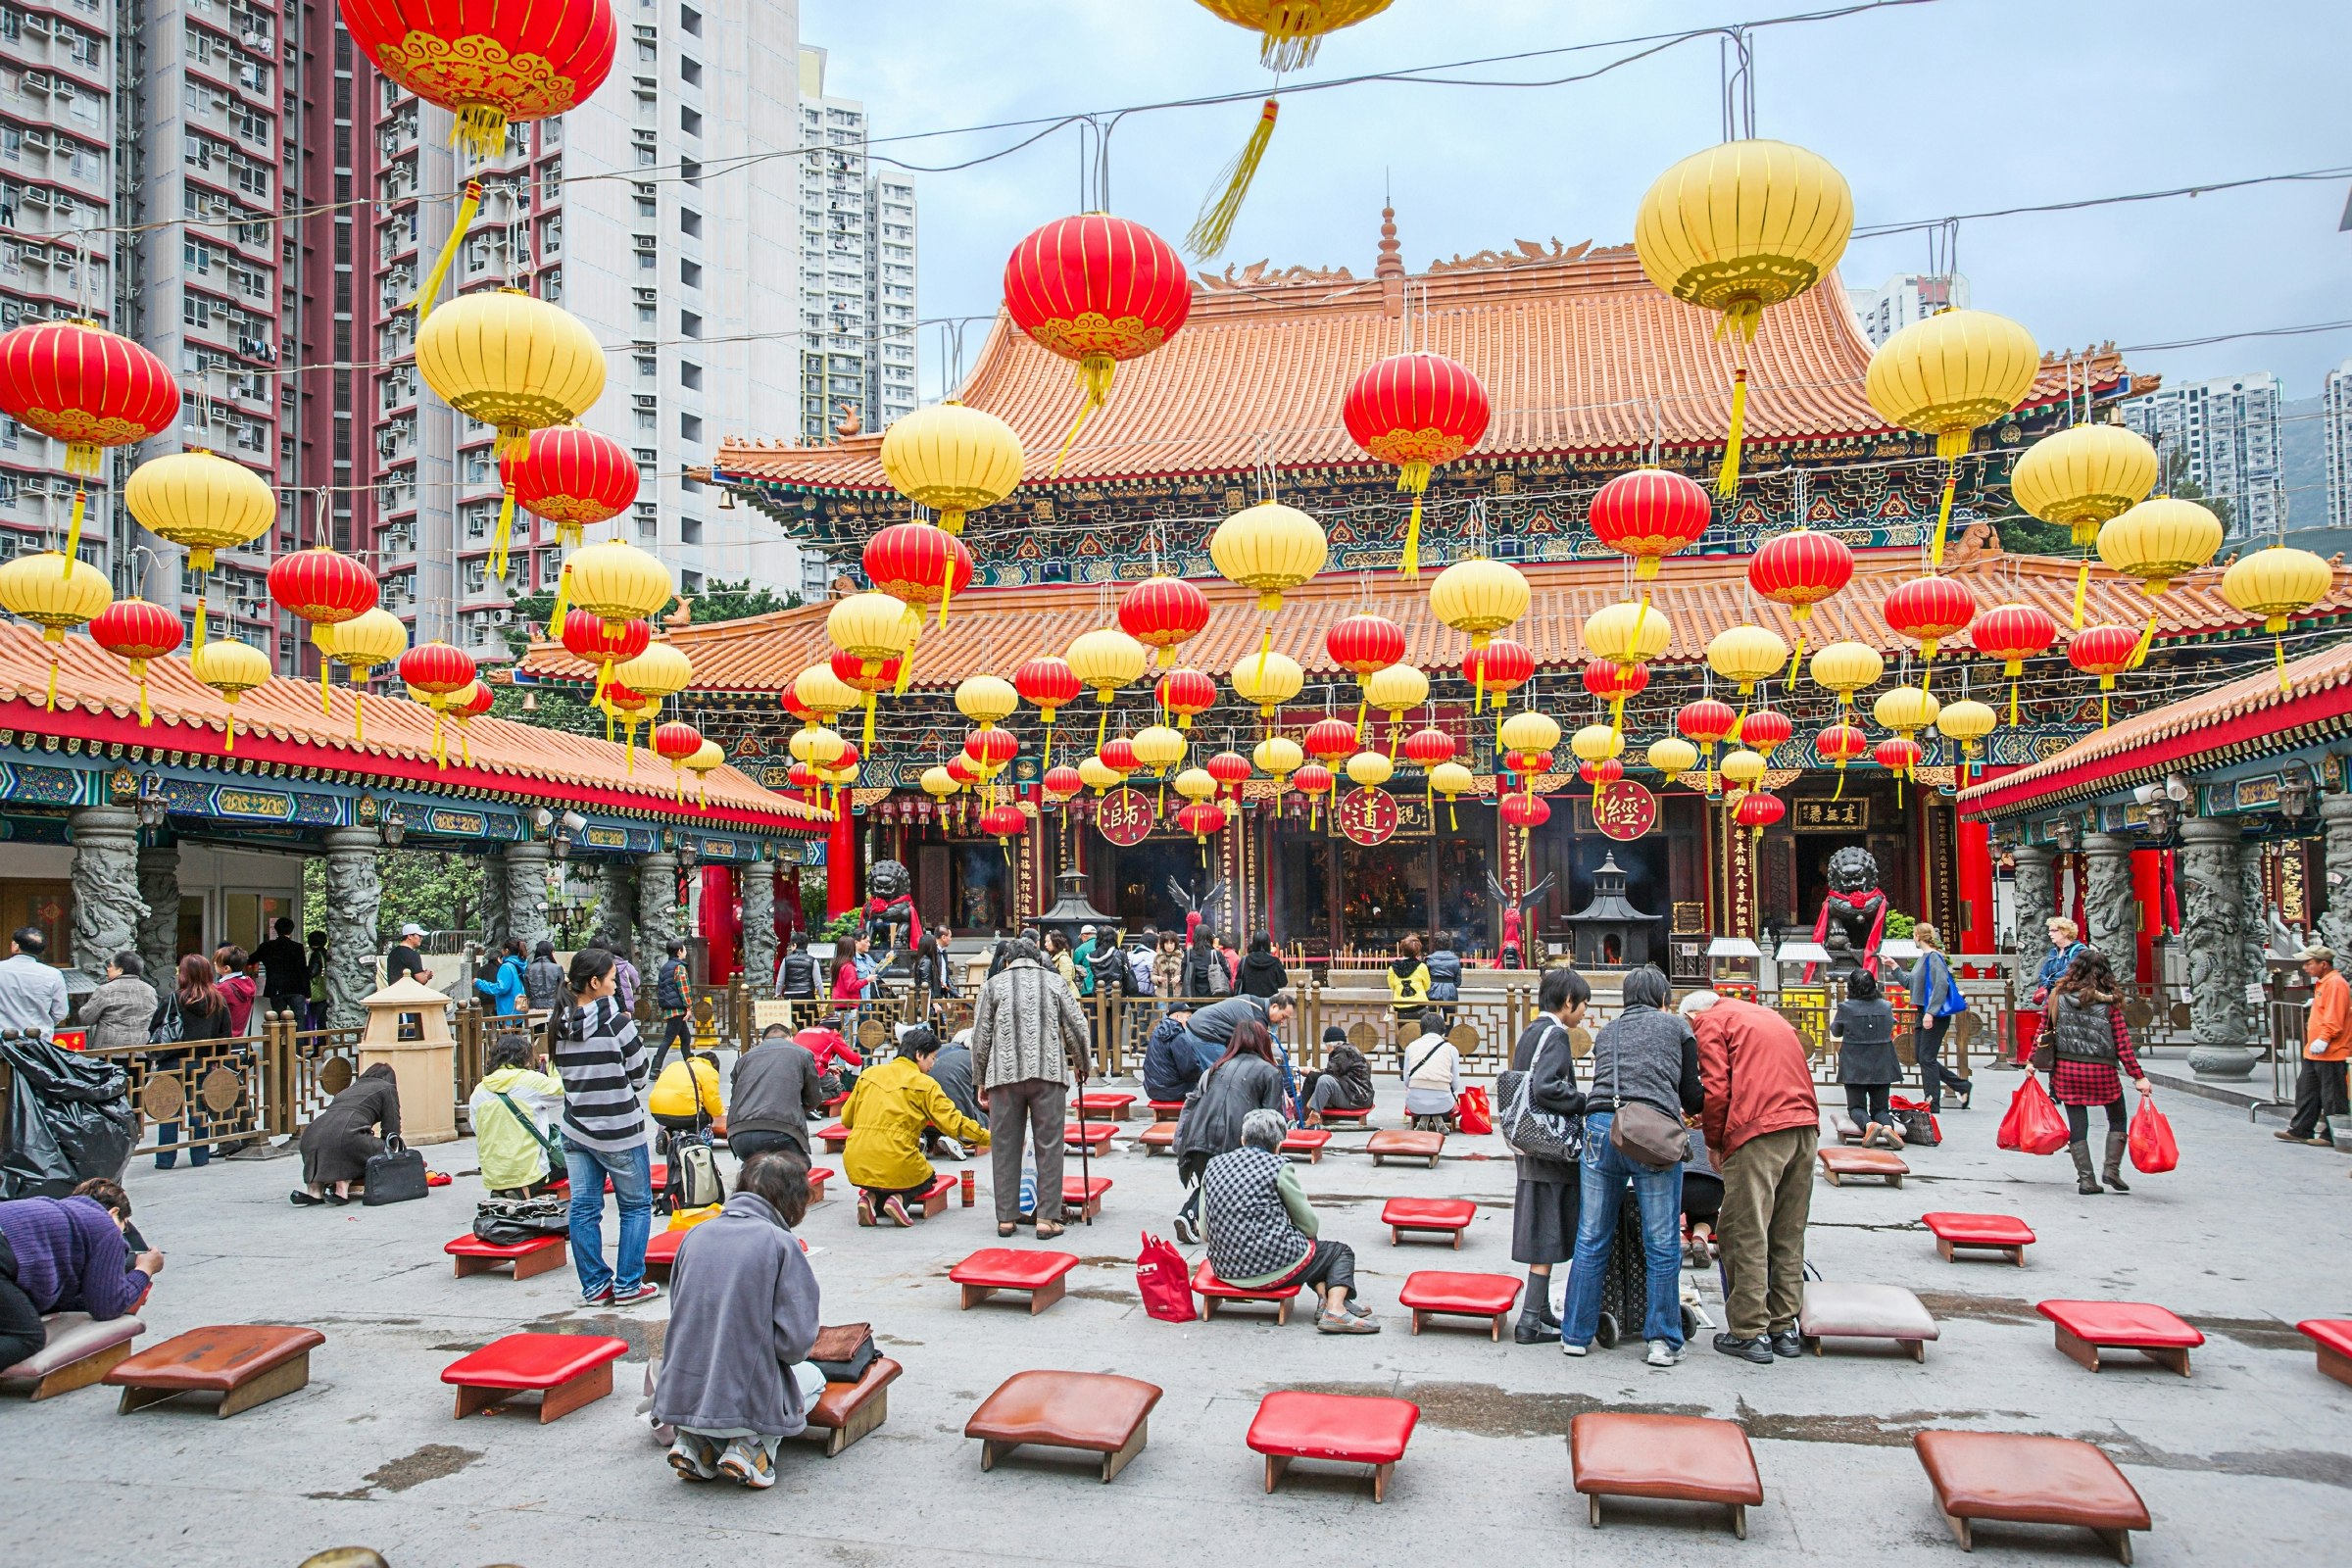 Flights to Hong Kong are 11 per cent cheaper than last year. Image: Roman Babakin/Shutterstock 